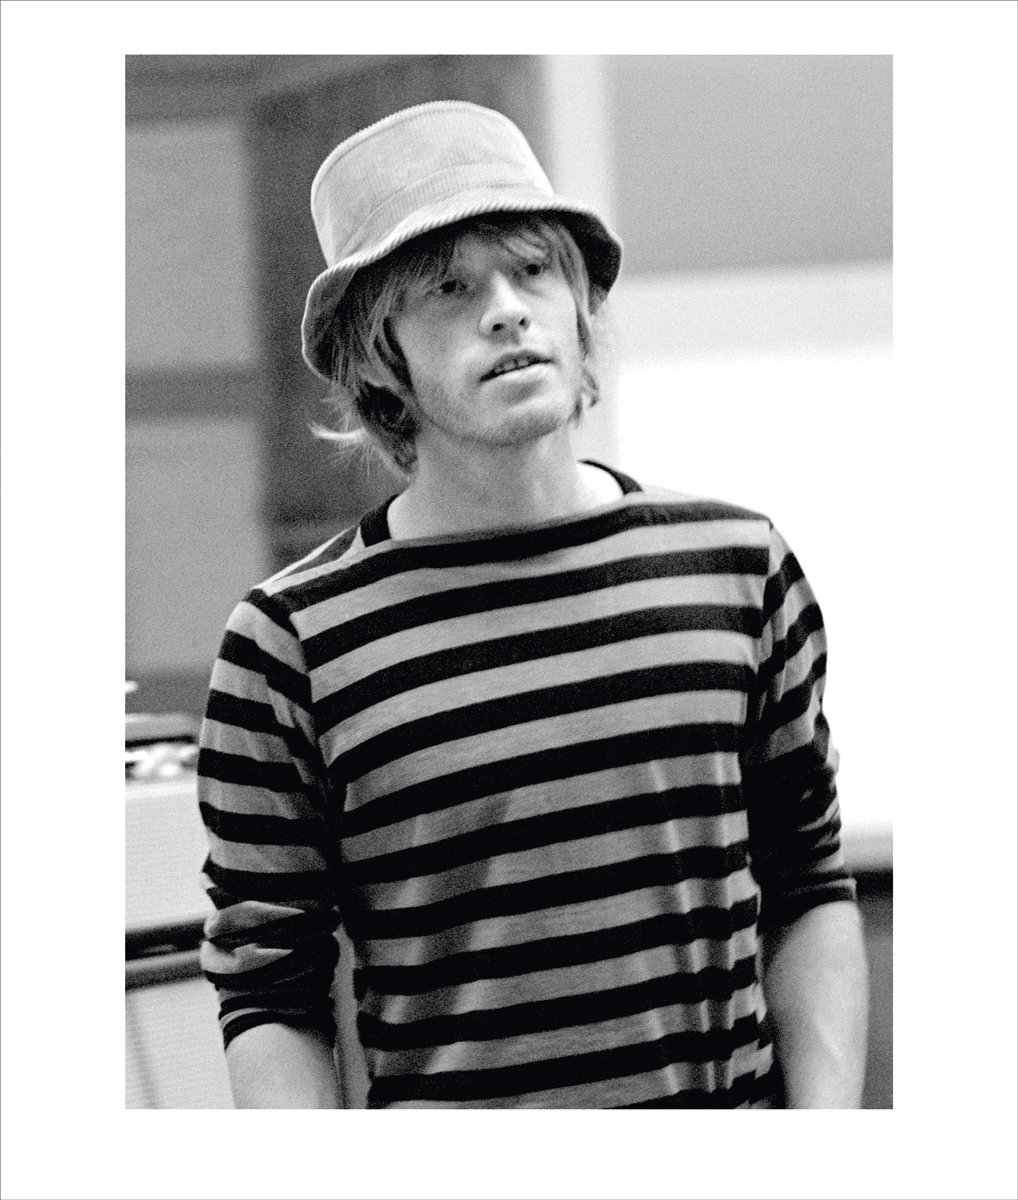 STONES with a colour backstage shot of Mick Jagger, black and white text From the Inside: Rare and Unseen Images